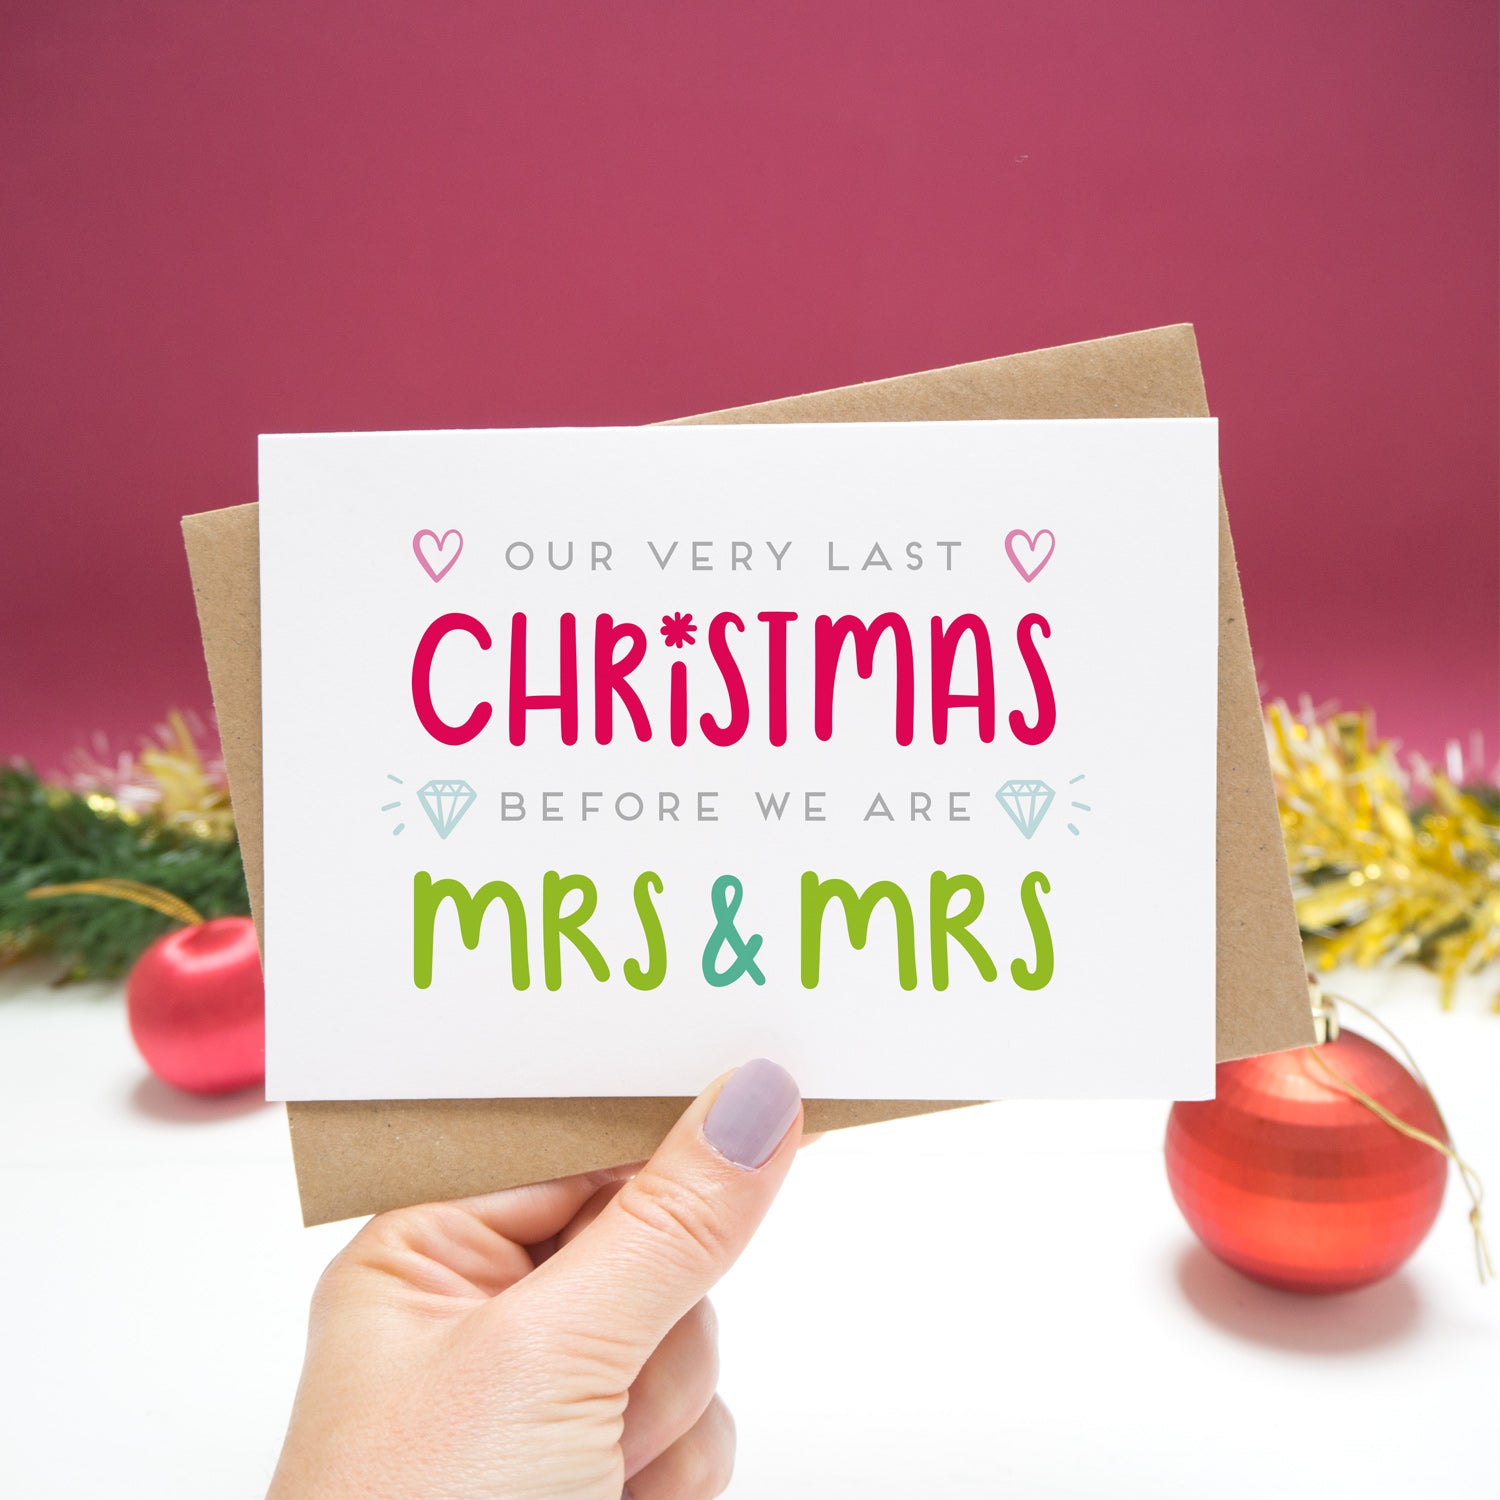 'Our very last Christmas before we are Mrs and Mrs. Christmas Card held in front of a Christmassy scene with baubles and tinsel.